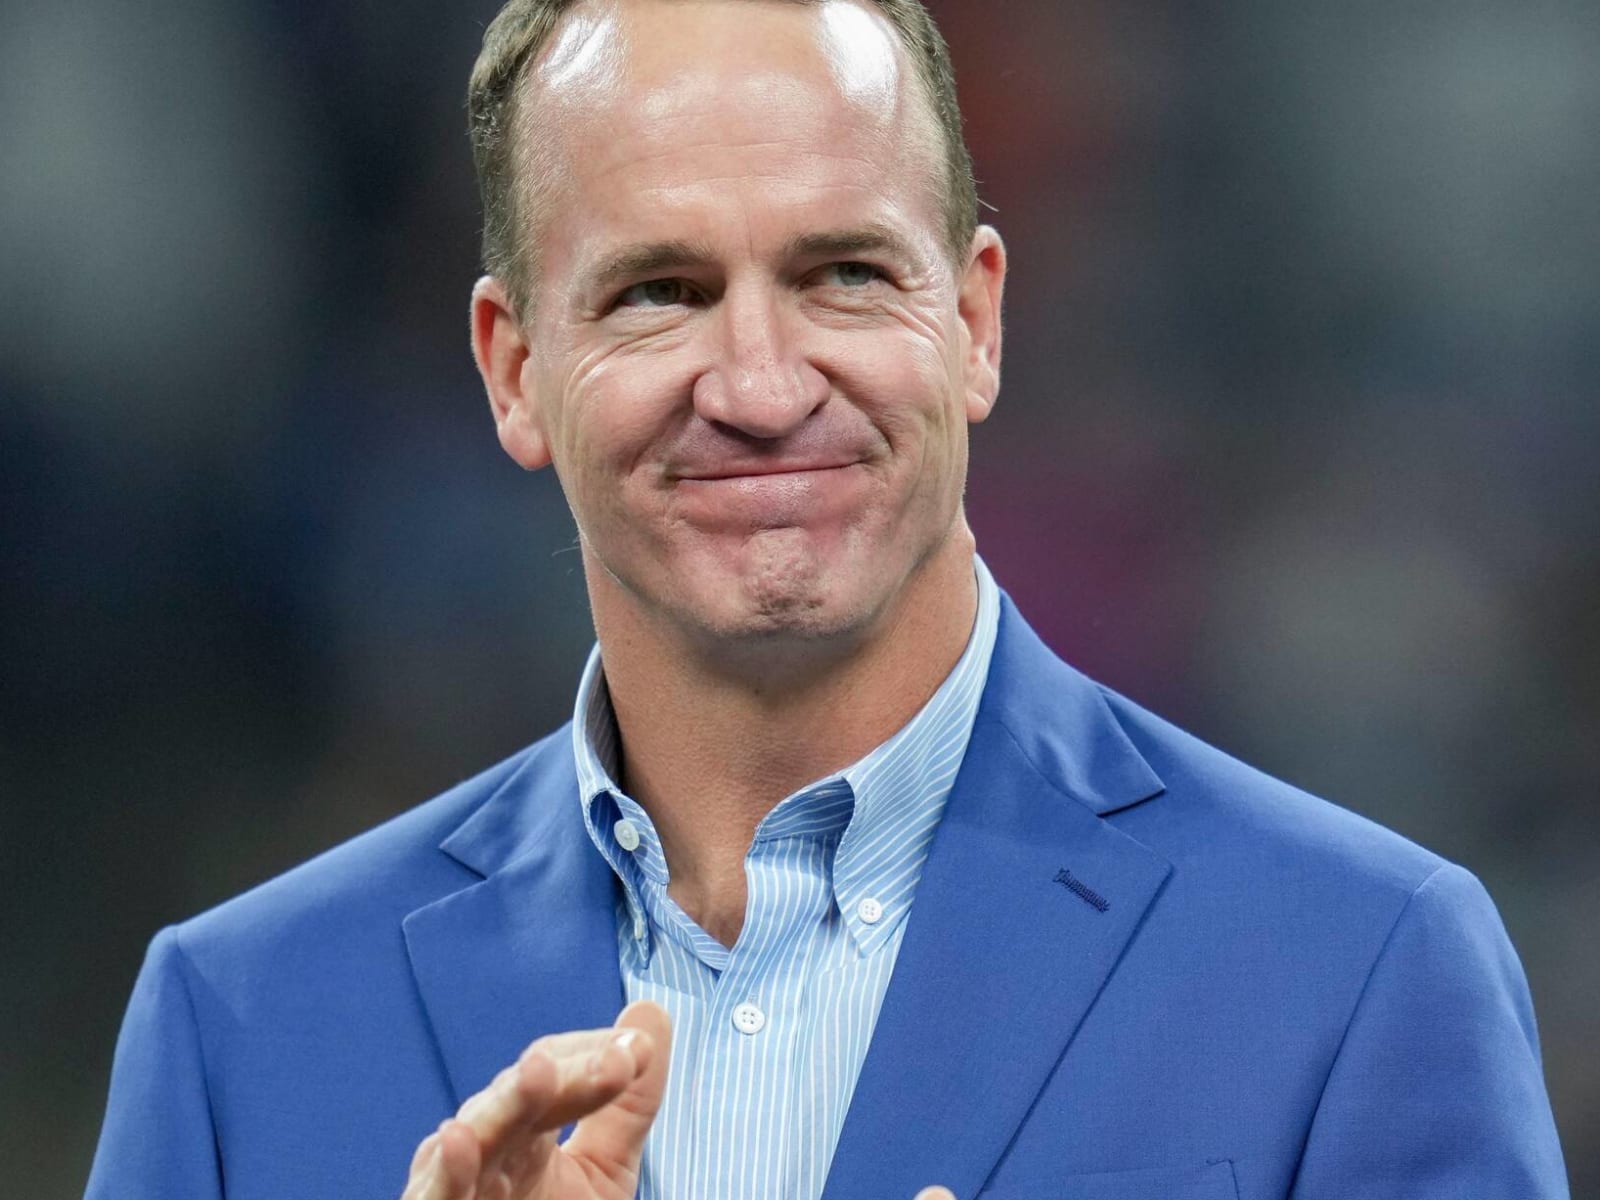 Peyton Manning shares his reaction to Saturday hire